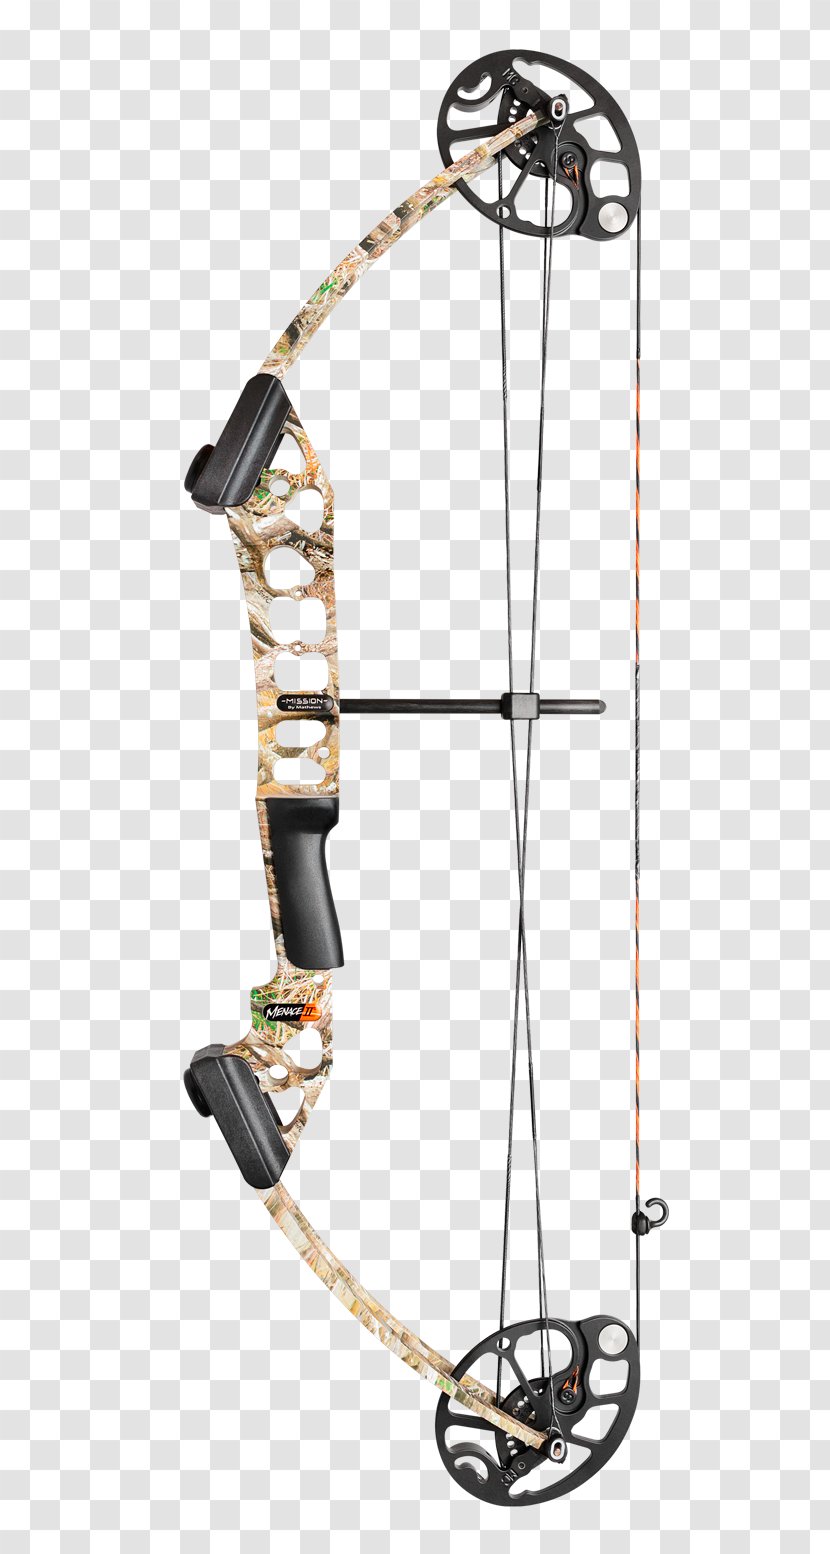 Archery Compound Bows Bow And Arrow Bowhunting Stabiliser - Crossbow Transparent PNG